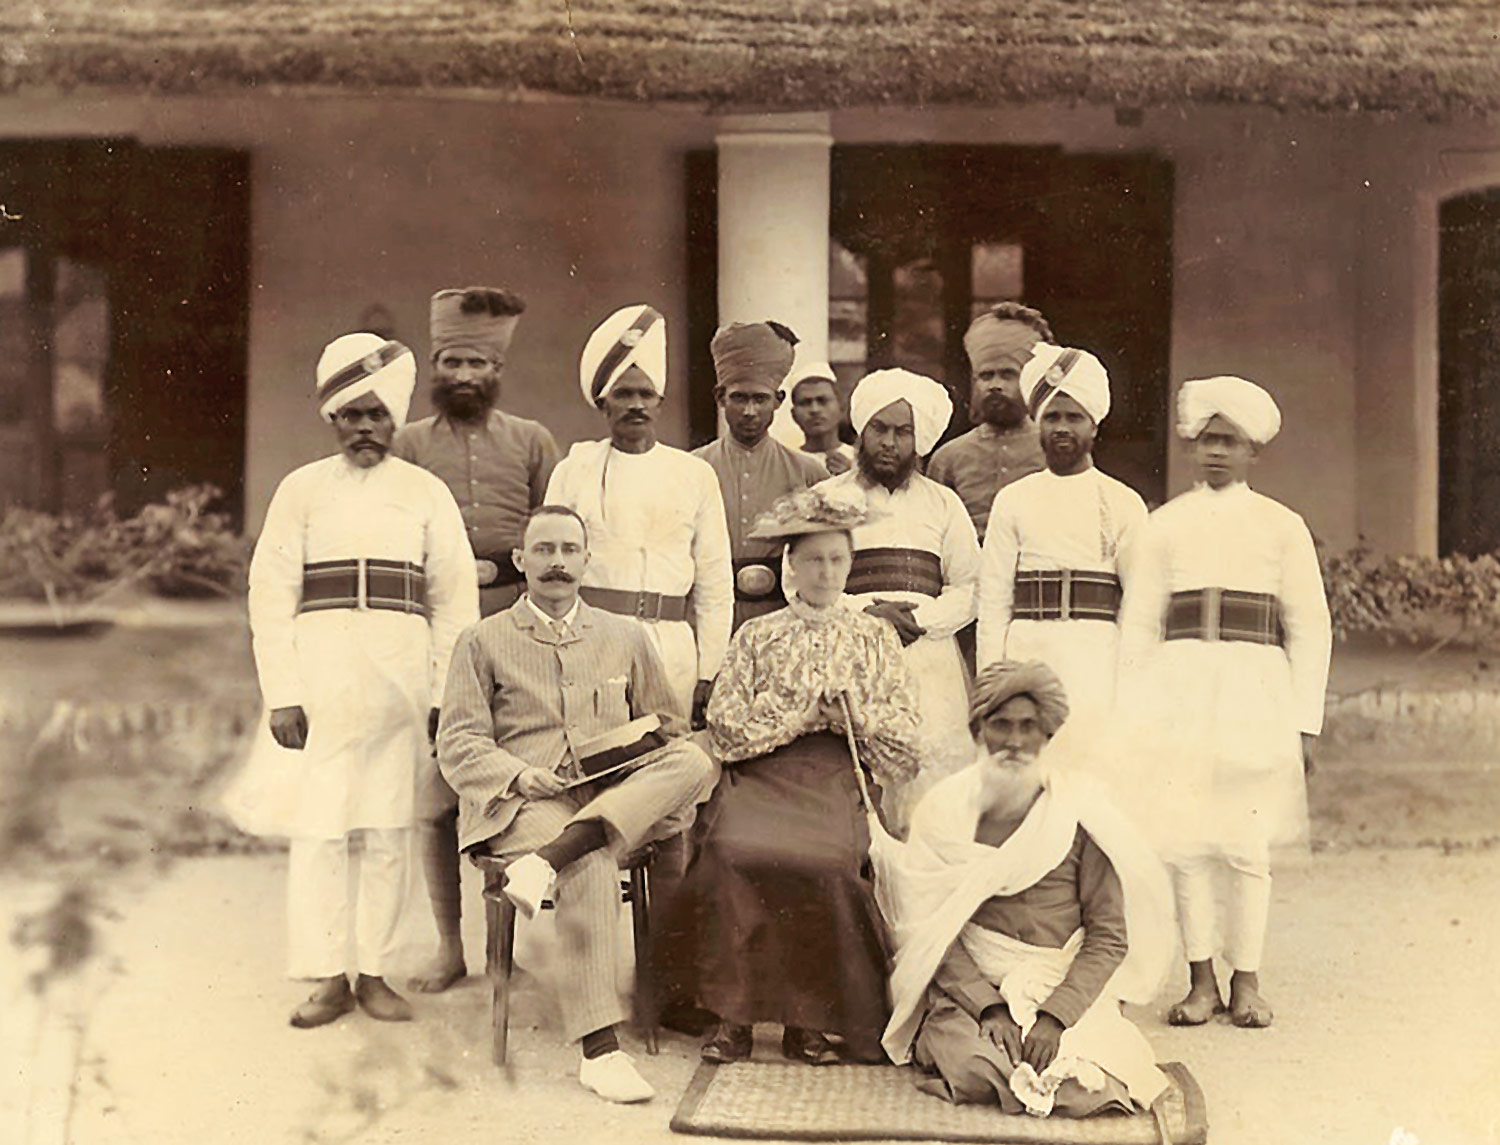 Image shows a vintage photo of a Euroepan couple amidst a collective of native policemen in British India, 1900.